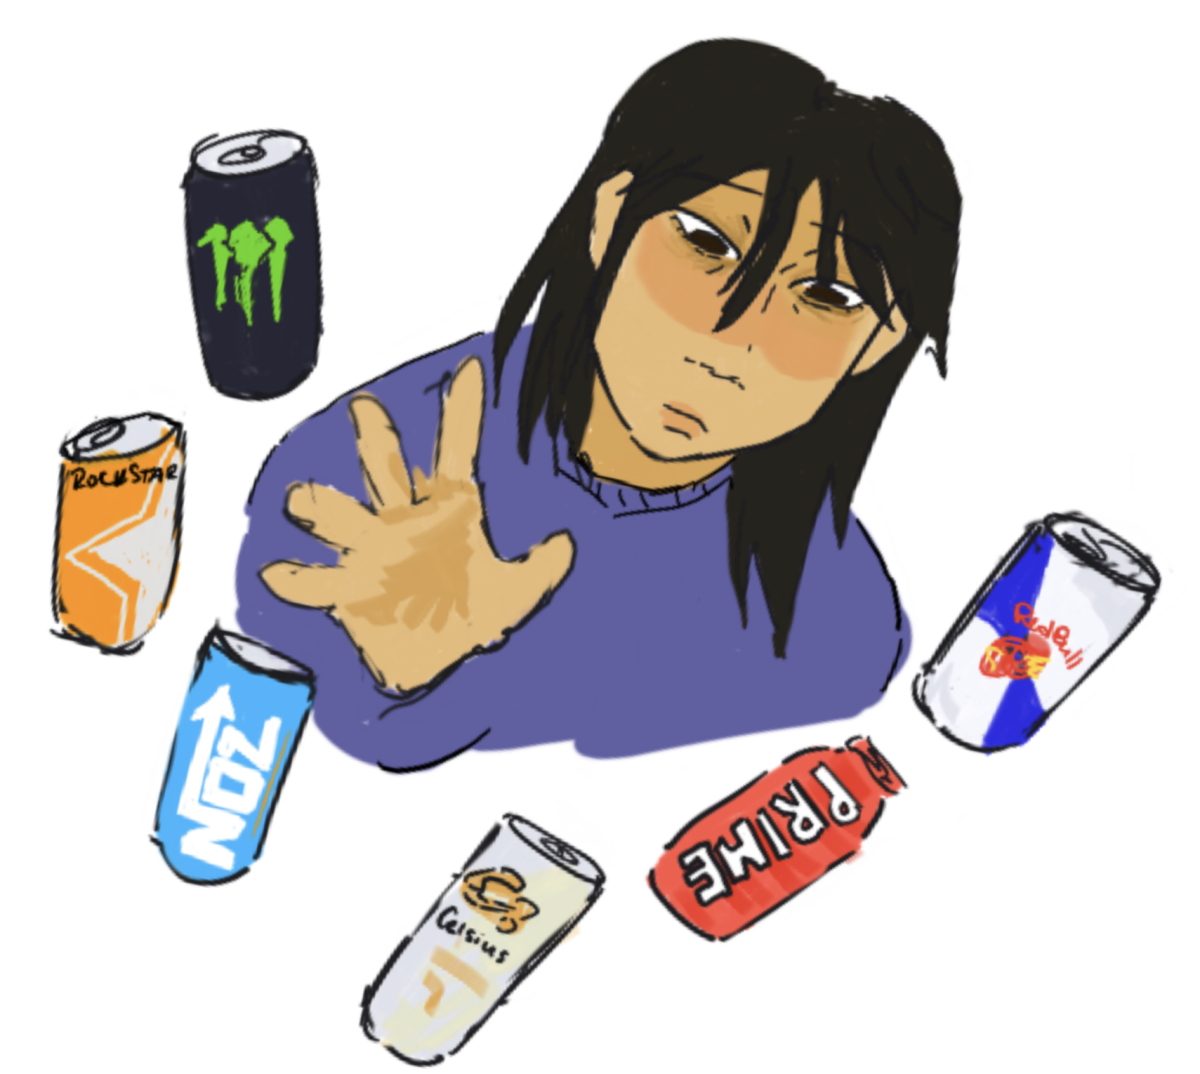 Energy drinks can be compared to alcohol